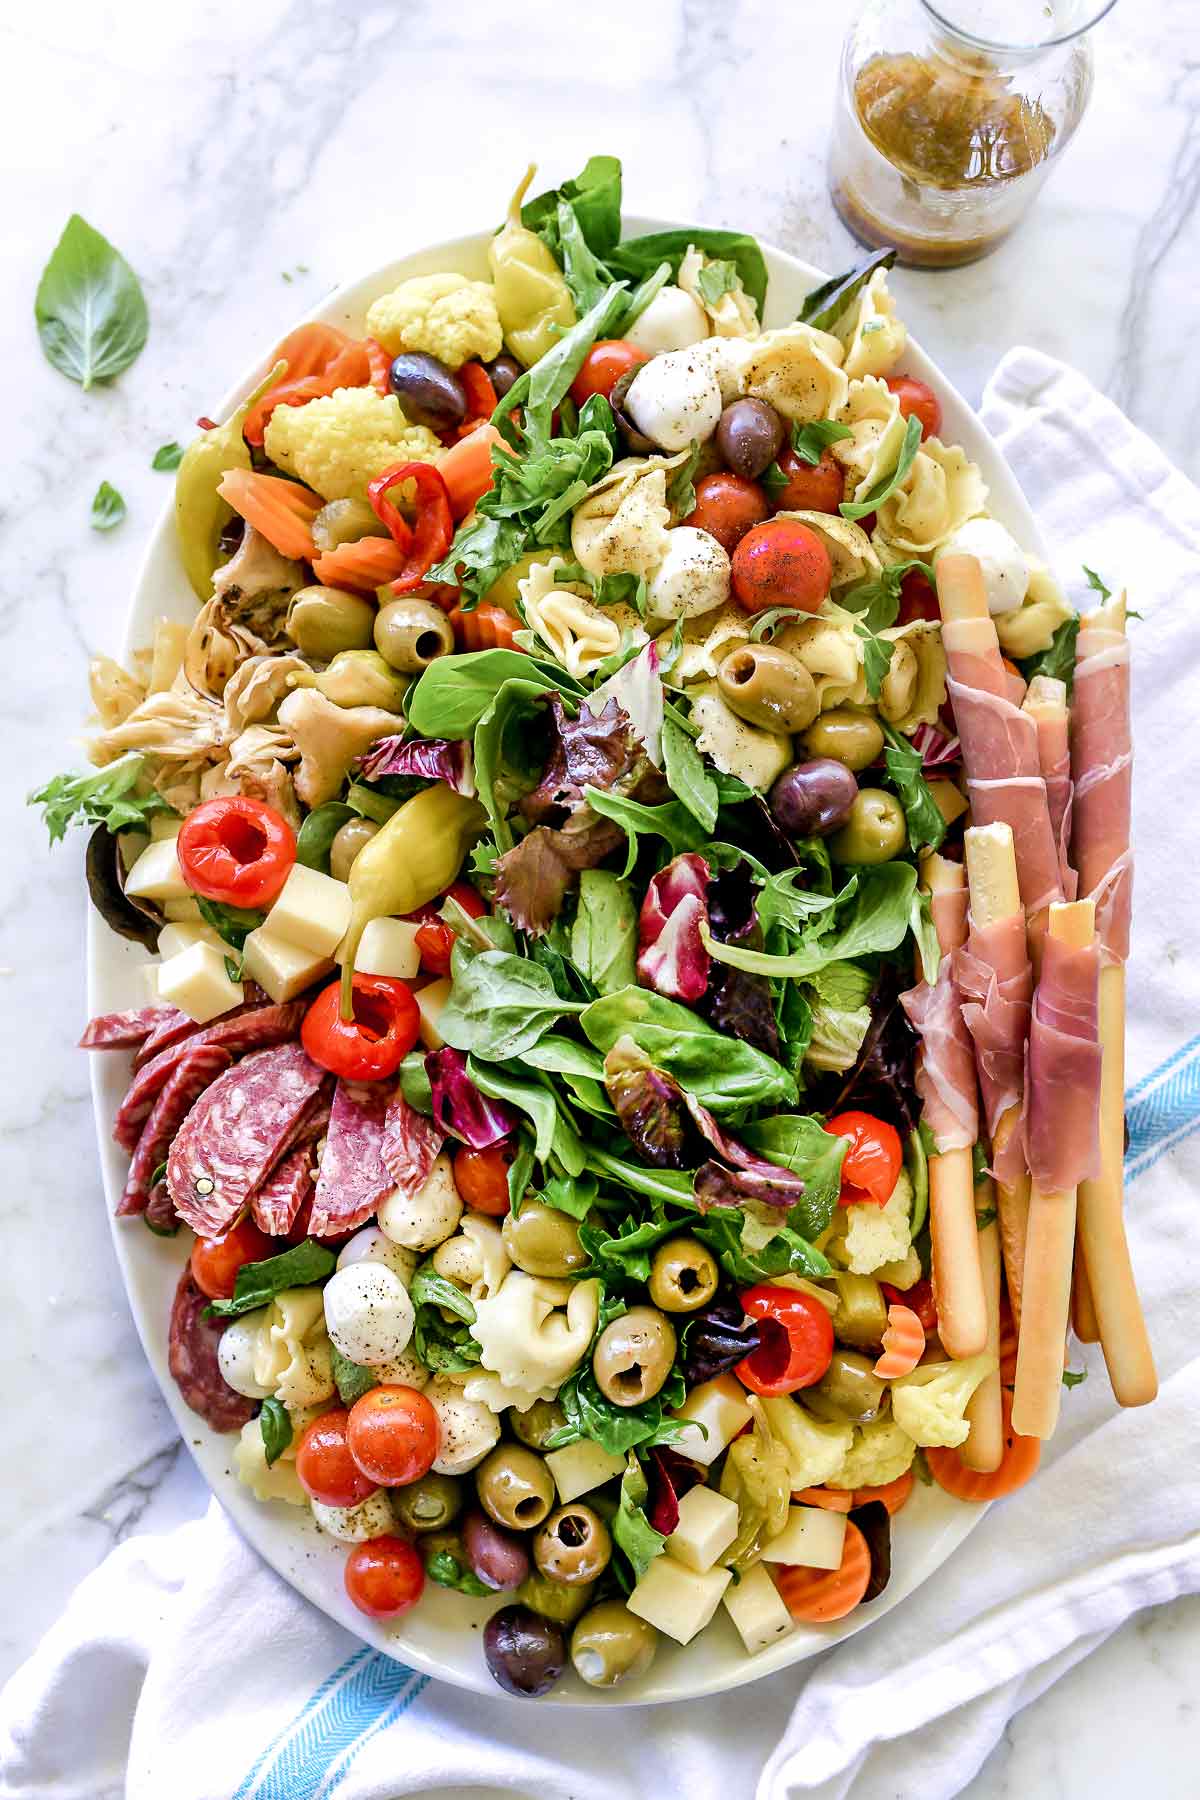 How To Make An Awesome Antipasto Salad Platter Foodiecrush Con